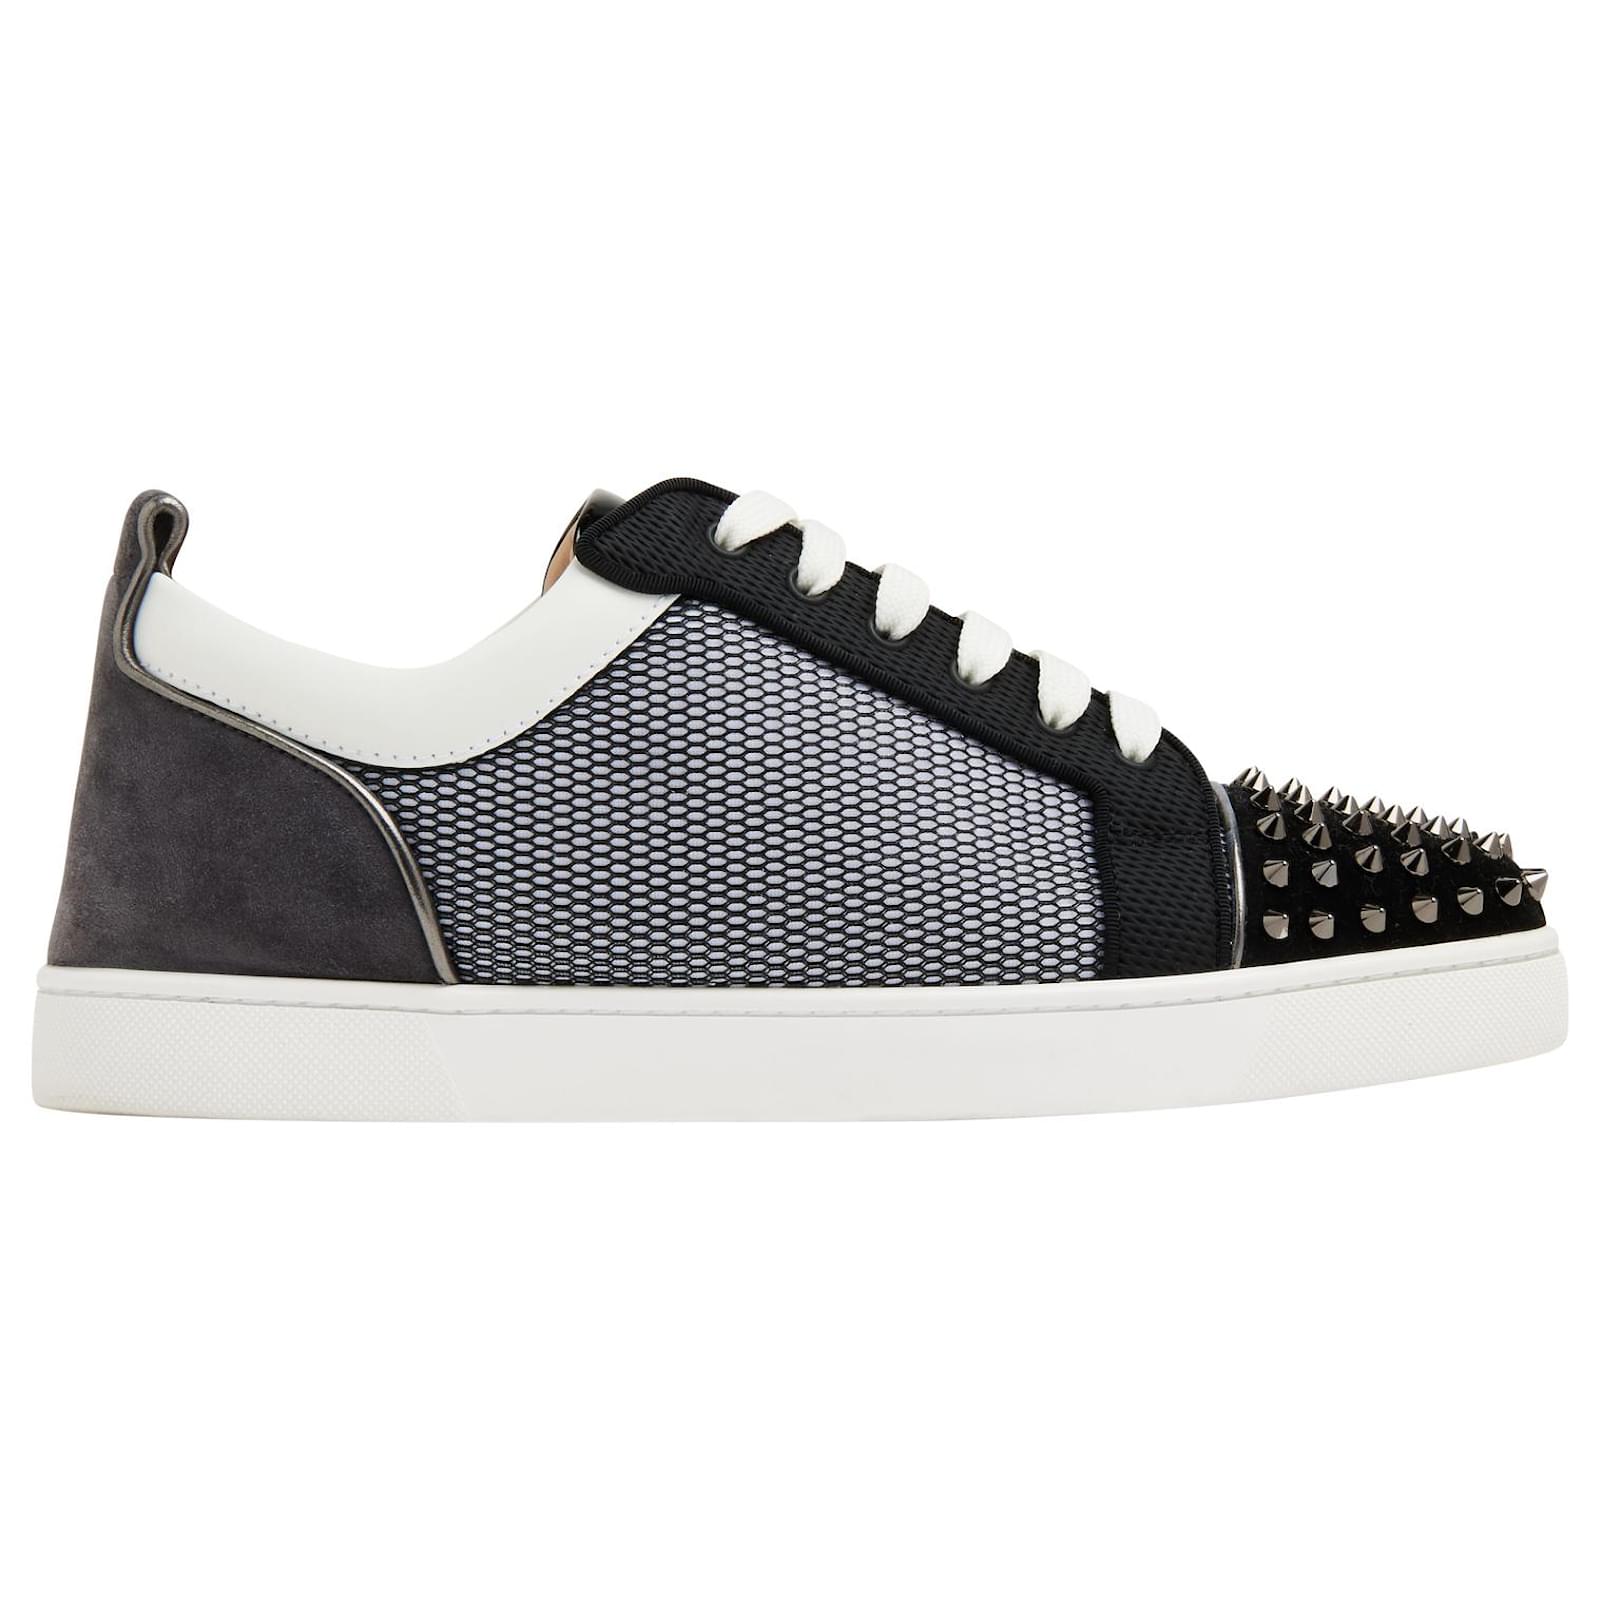 Louis Junior Spikes Sneakers in White - Christian Louboutin